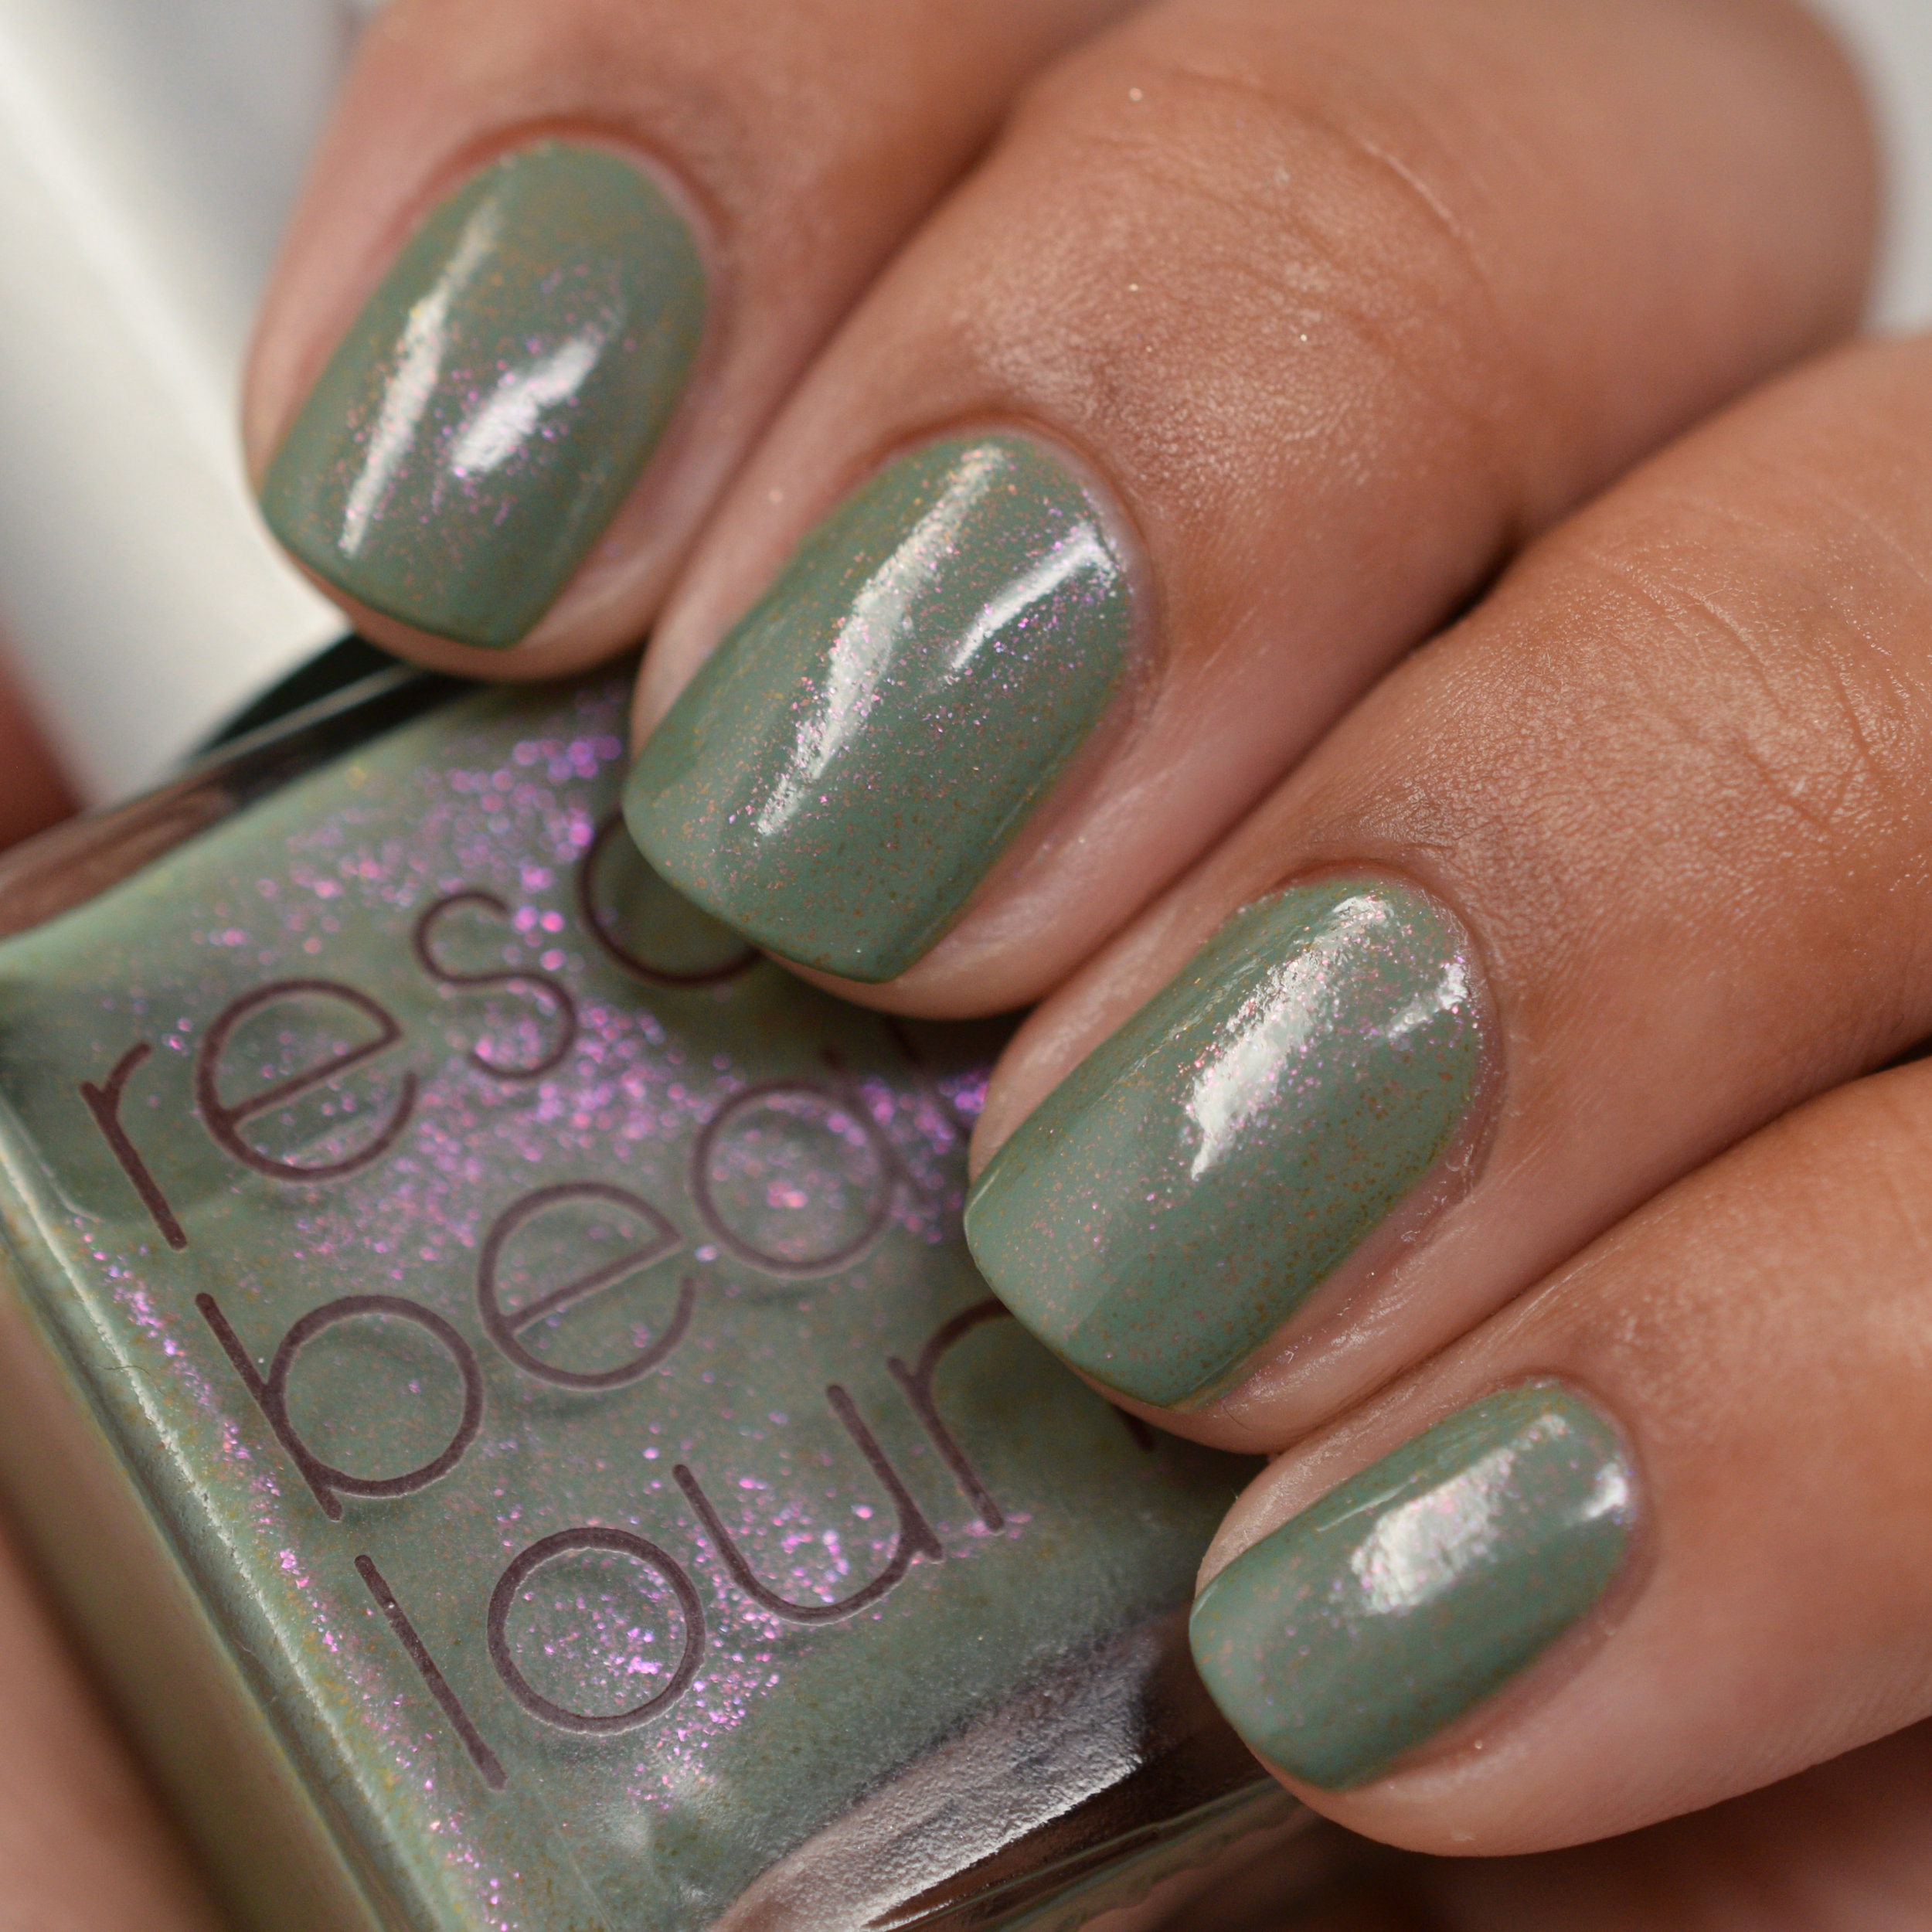 Rescue Beauty Lounge Fan Collection Spring 2012 - Halcyon.jpg